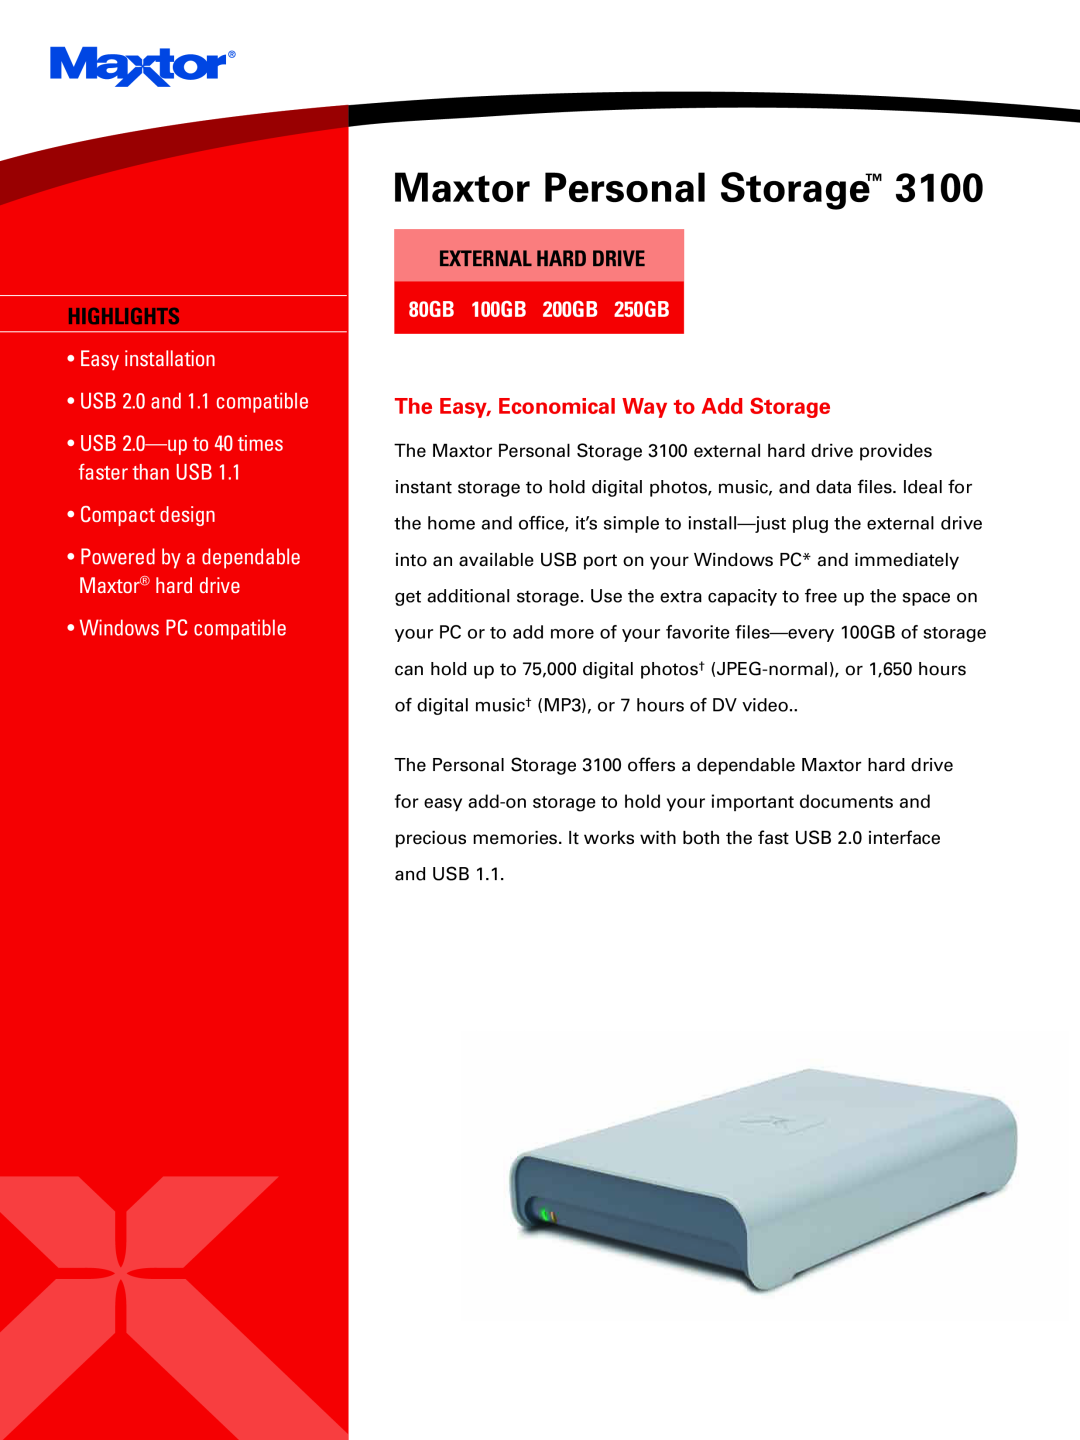 Maxtor M01H250 manual Maxtor Personal Storage, Highlights, Easy installation USB 2.0 and 1.1 compatible, Compact design 